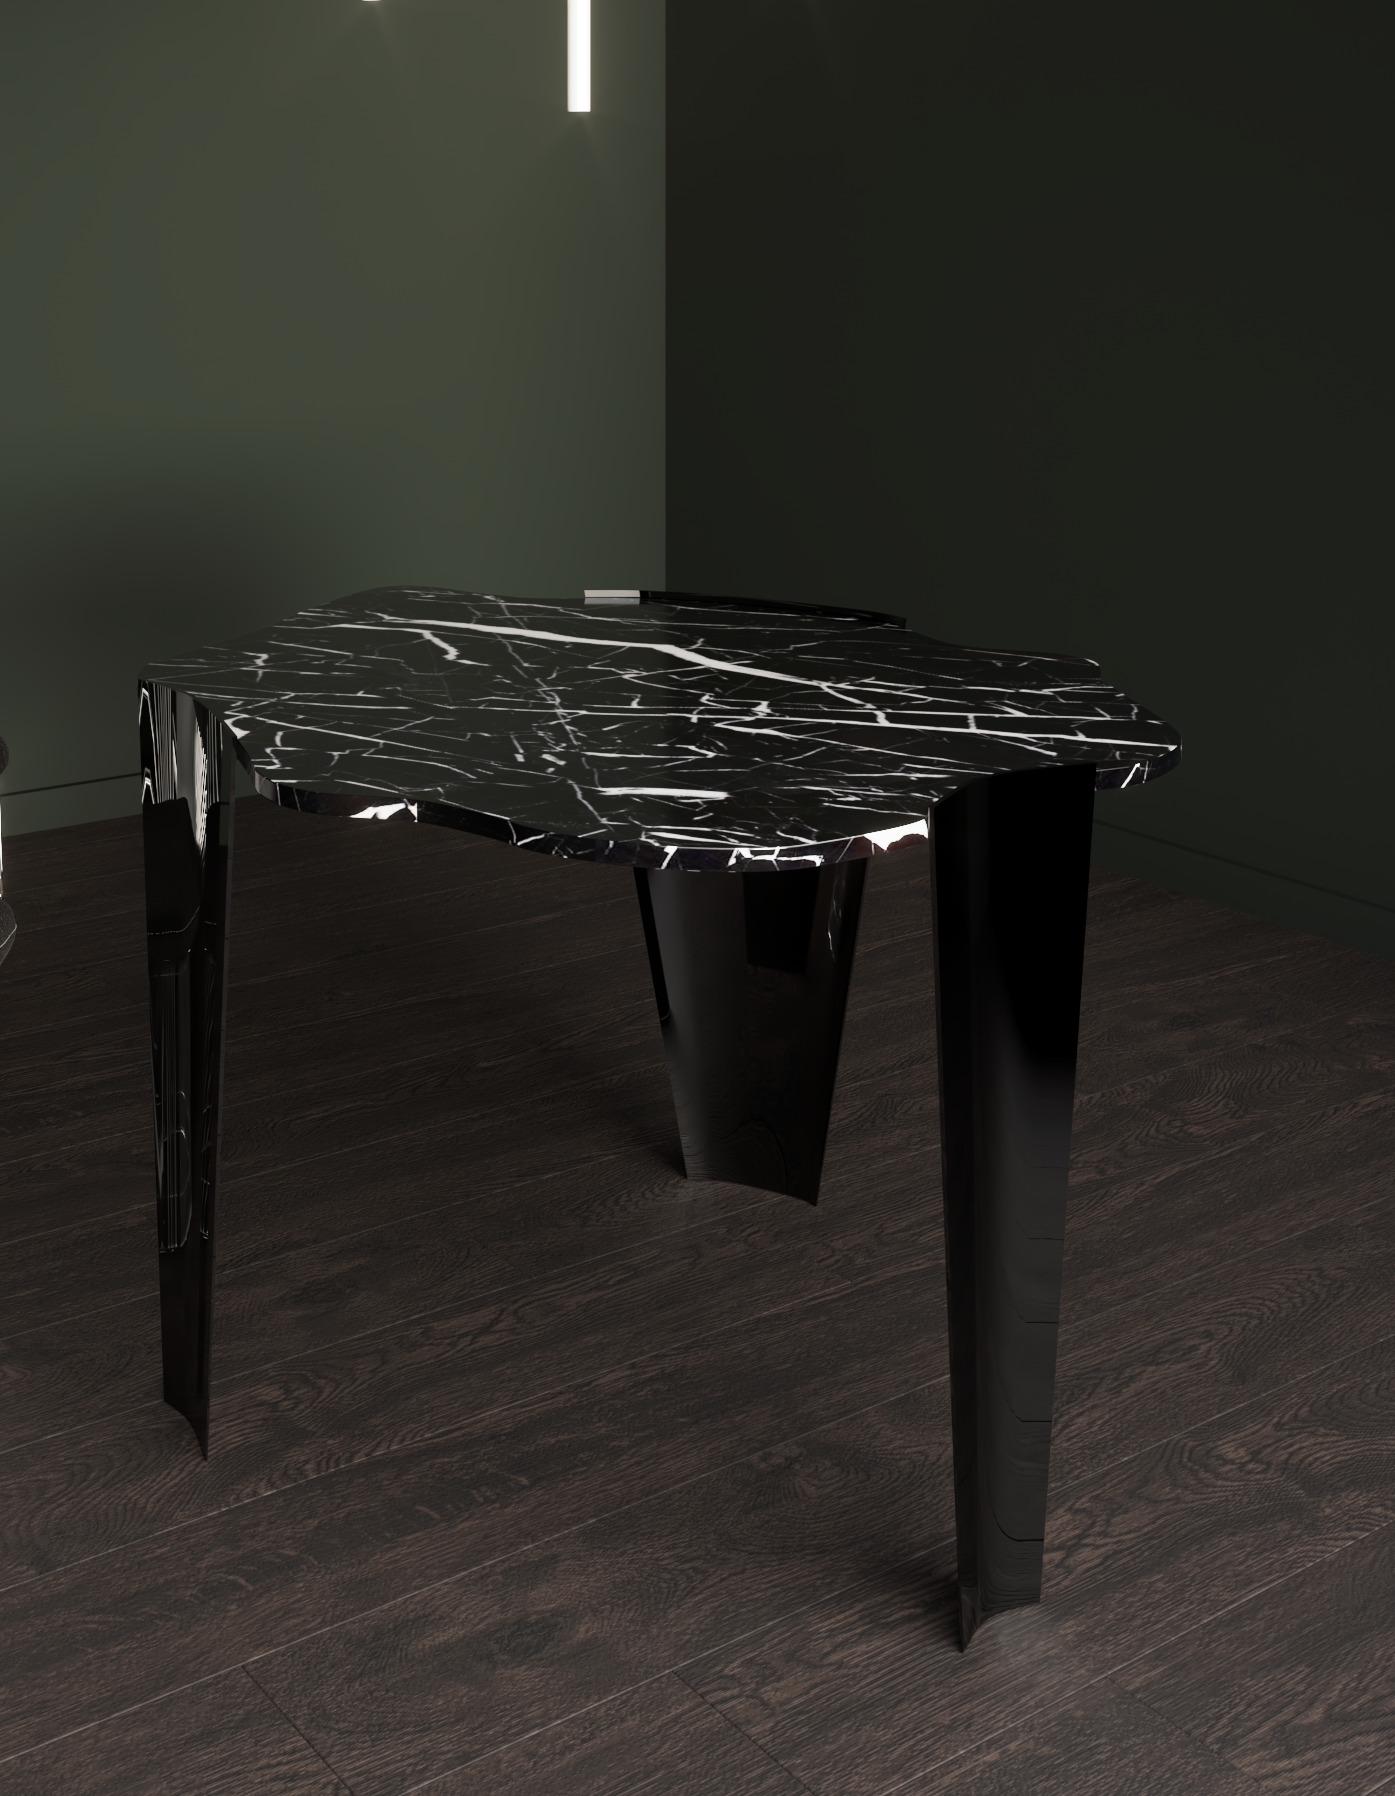 Marble nube table handsculpted by ELEMENT&CO
Dimensions: 77 x 120 x 120 cm
Materials: Black marble tabletop with metal lacquered feet

Carved from one solid marble piece, the sensual curves of the table-top and straight lines of the three legs